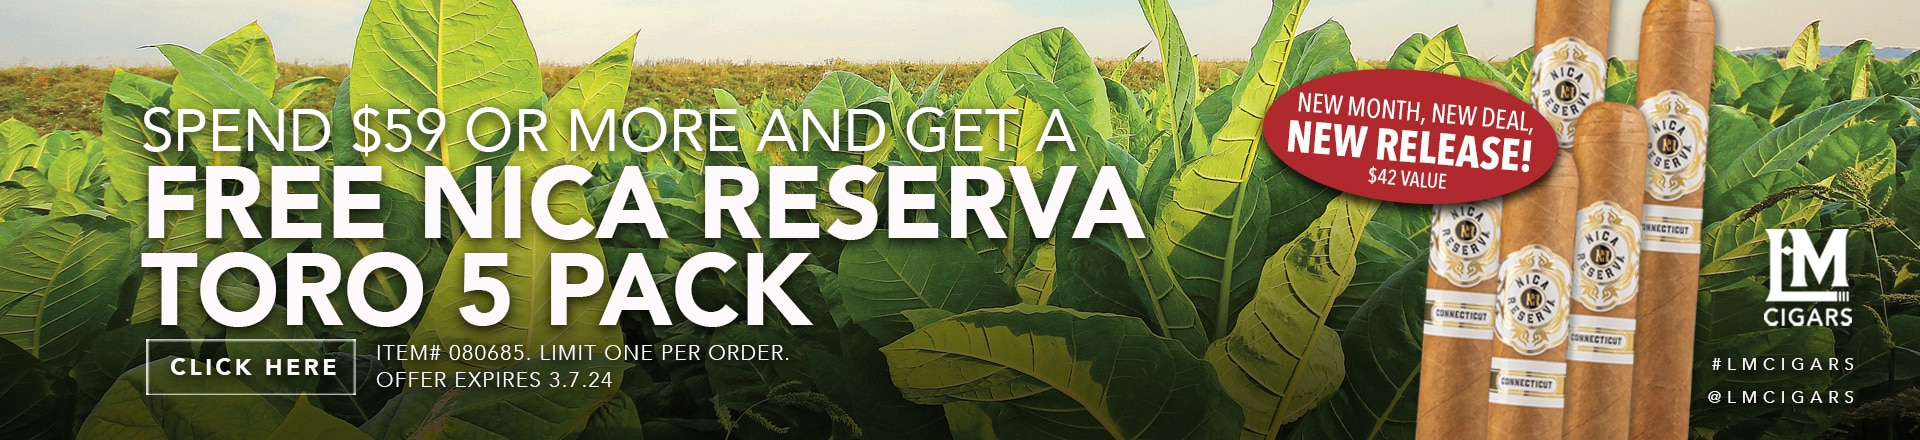 free nica reserva 5 pack with orders over $59